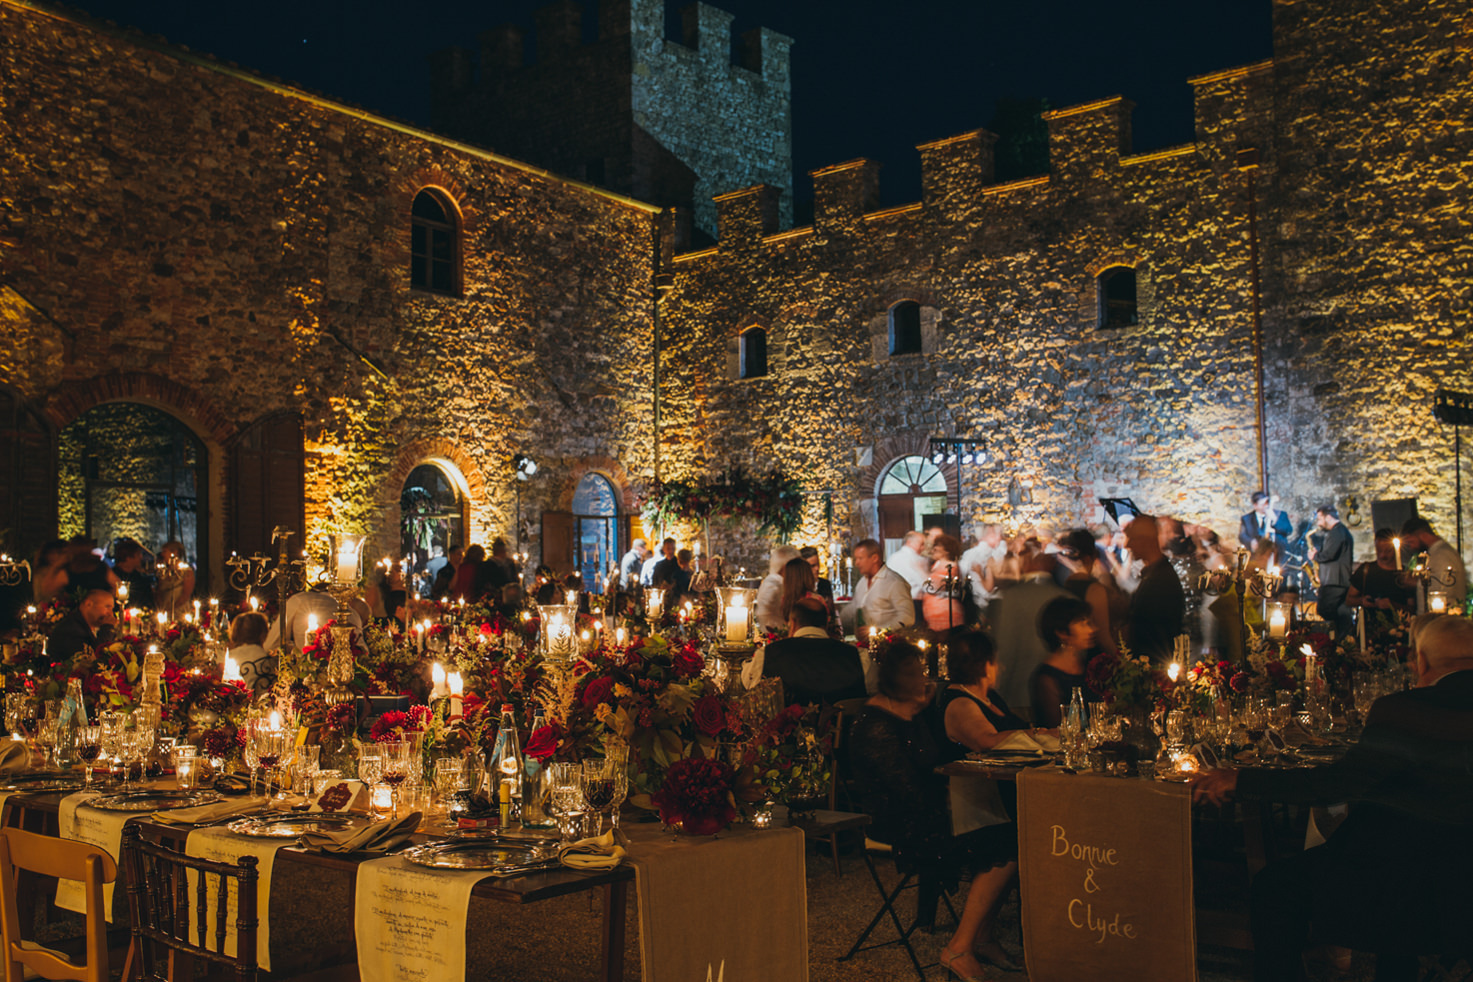 Wedding night at the castle